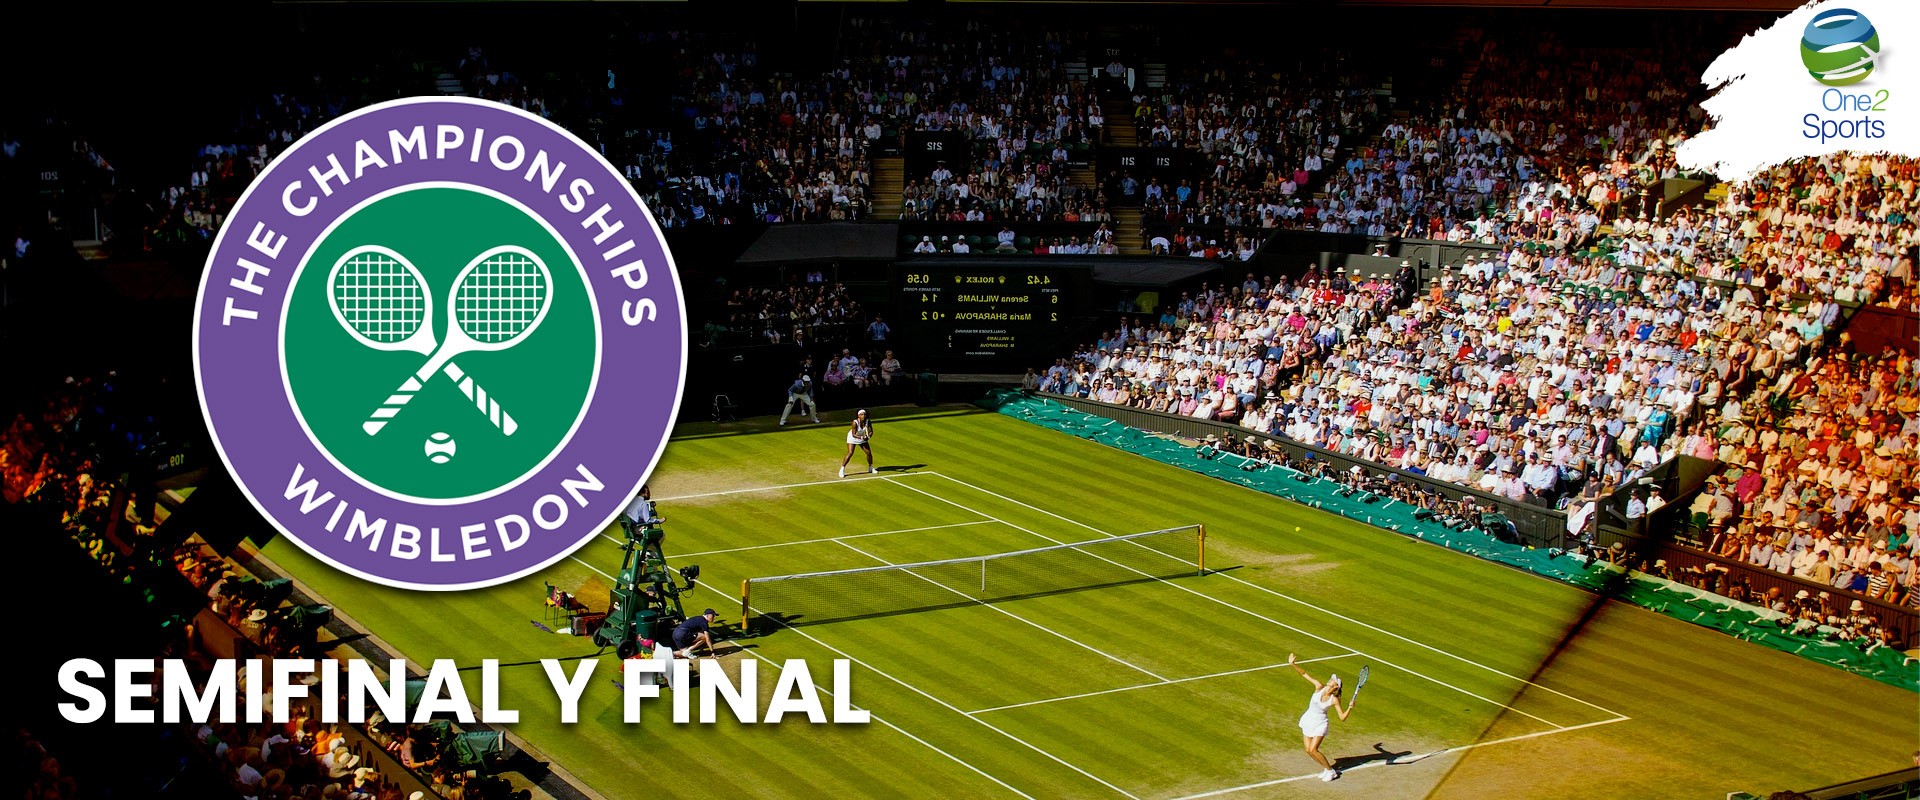 Torneo Wimbledon semifinal y final One2 Travel Group